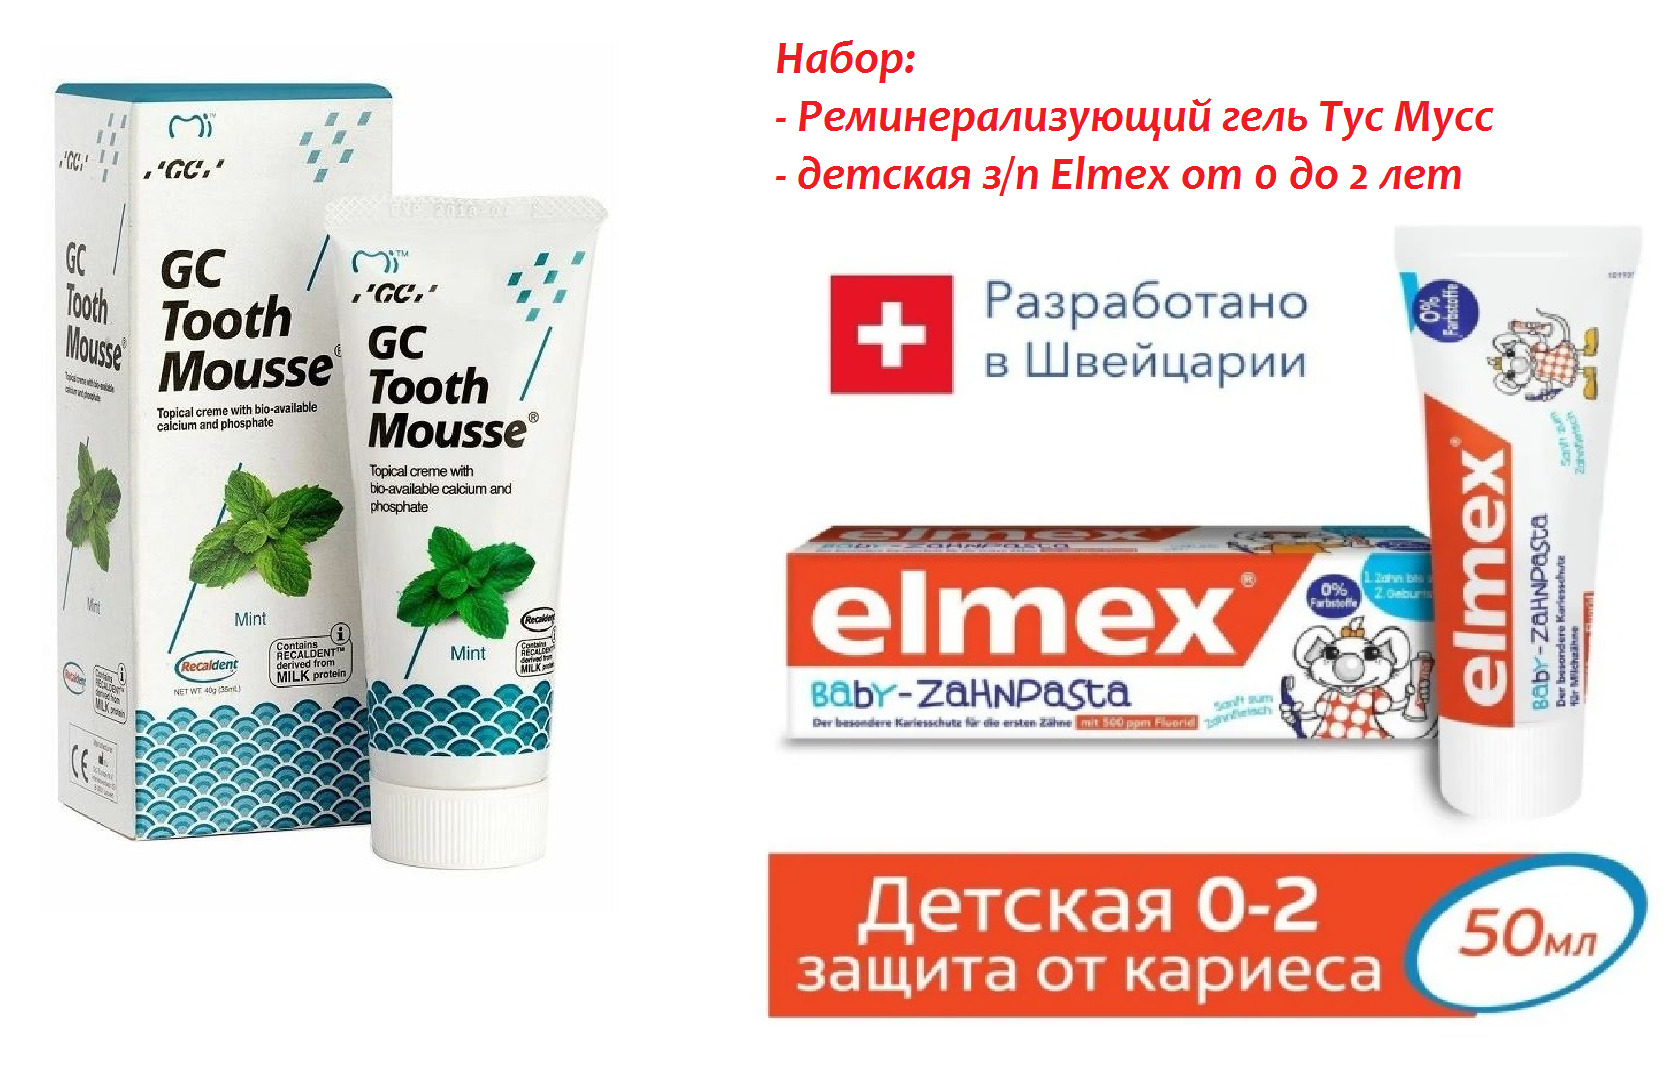 Tooth Mousse Гель Аптека Ру